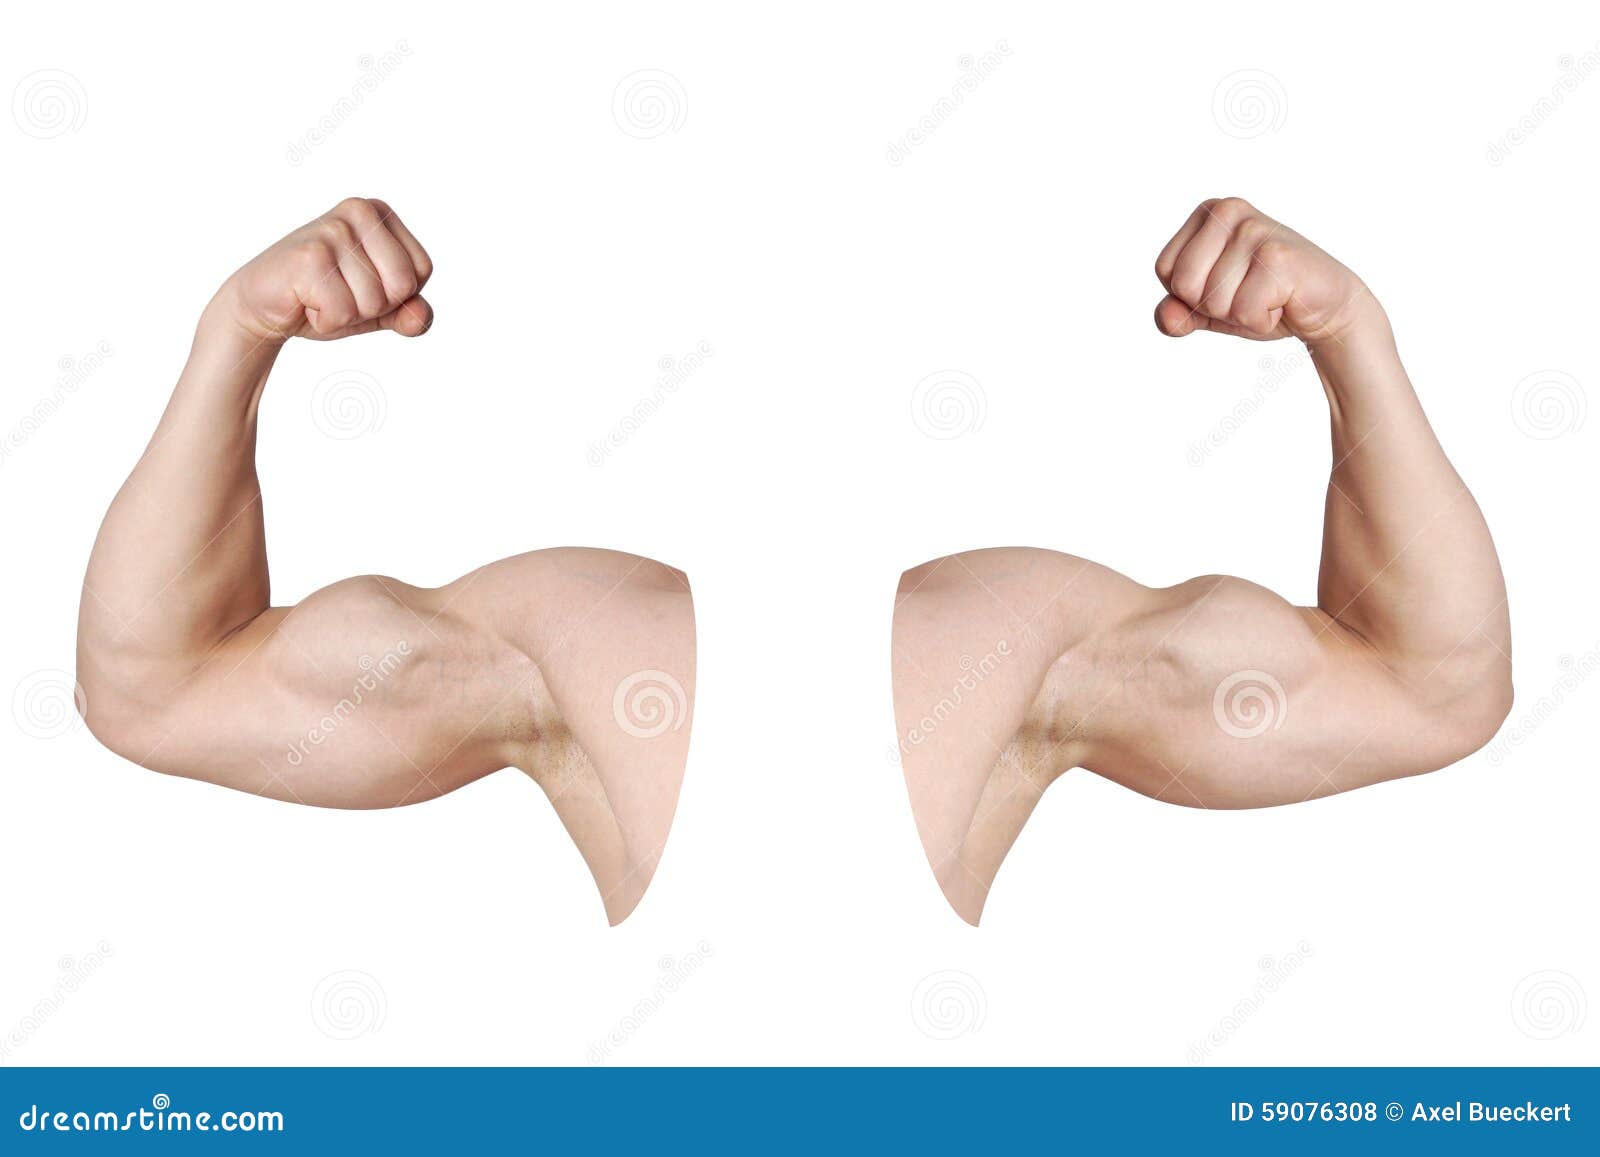 Male Arms With Flexed Biceps Muscles Stock Photo - Image ...